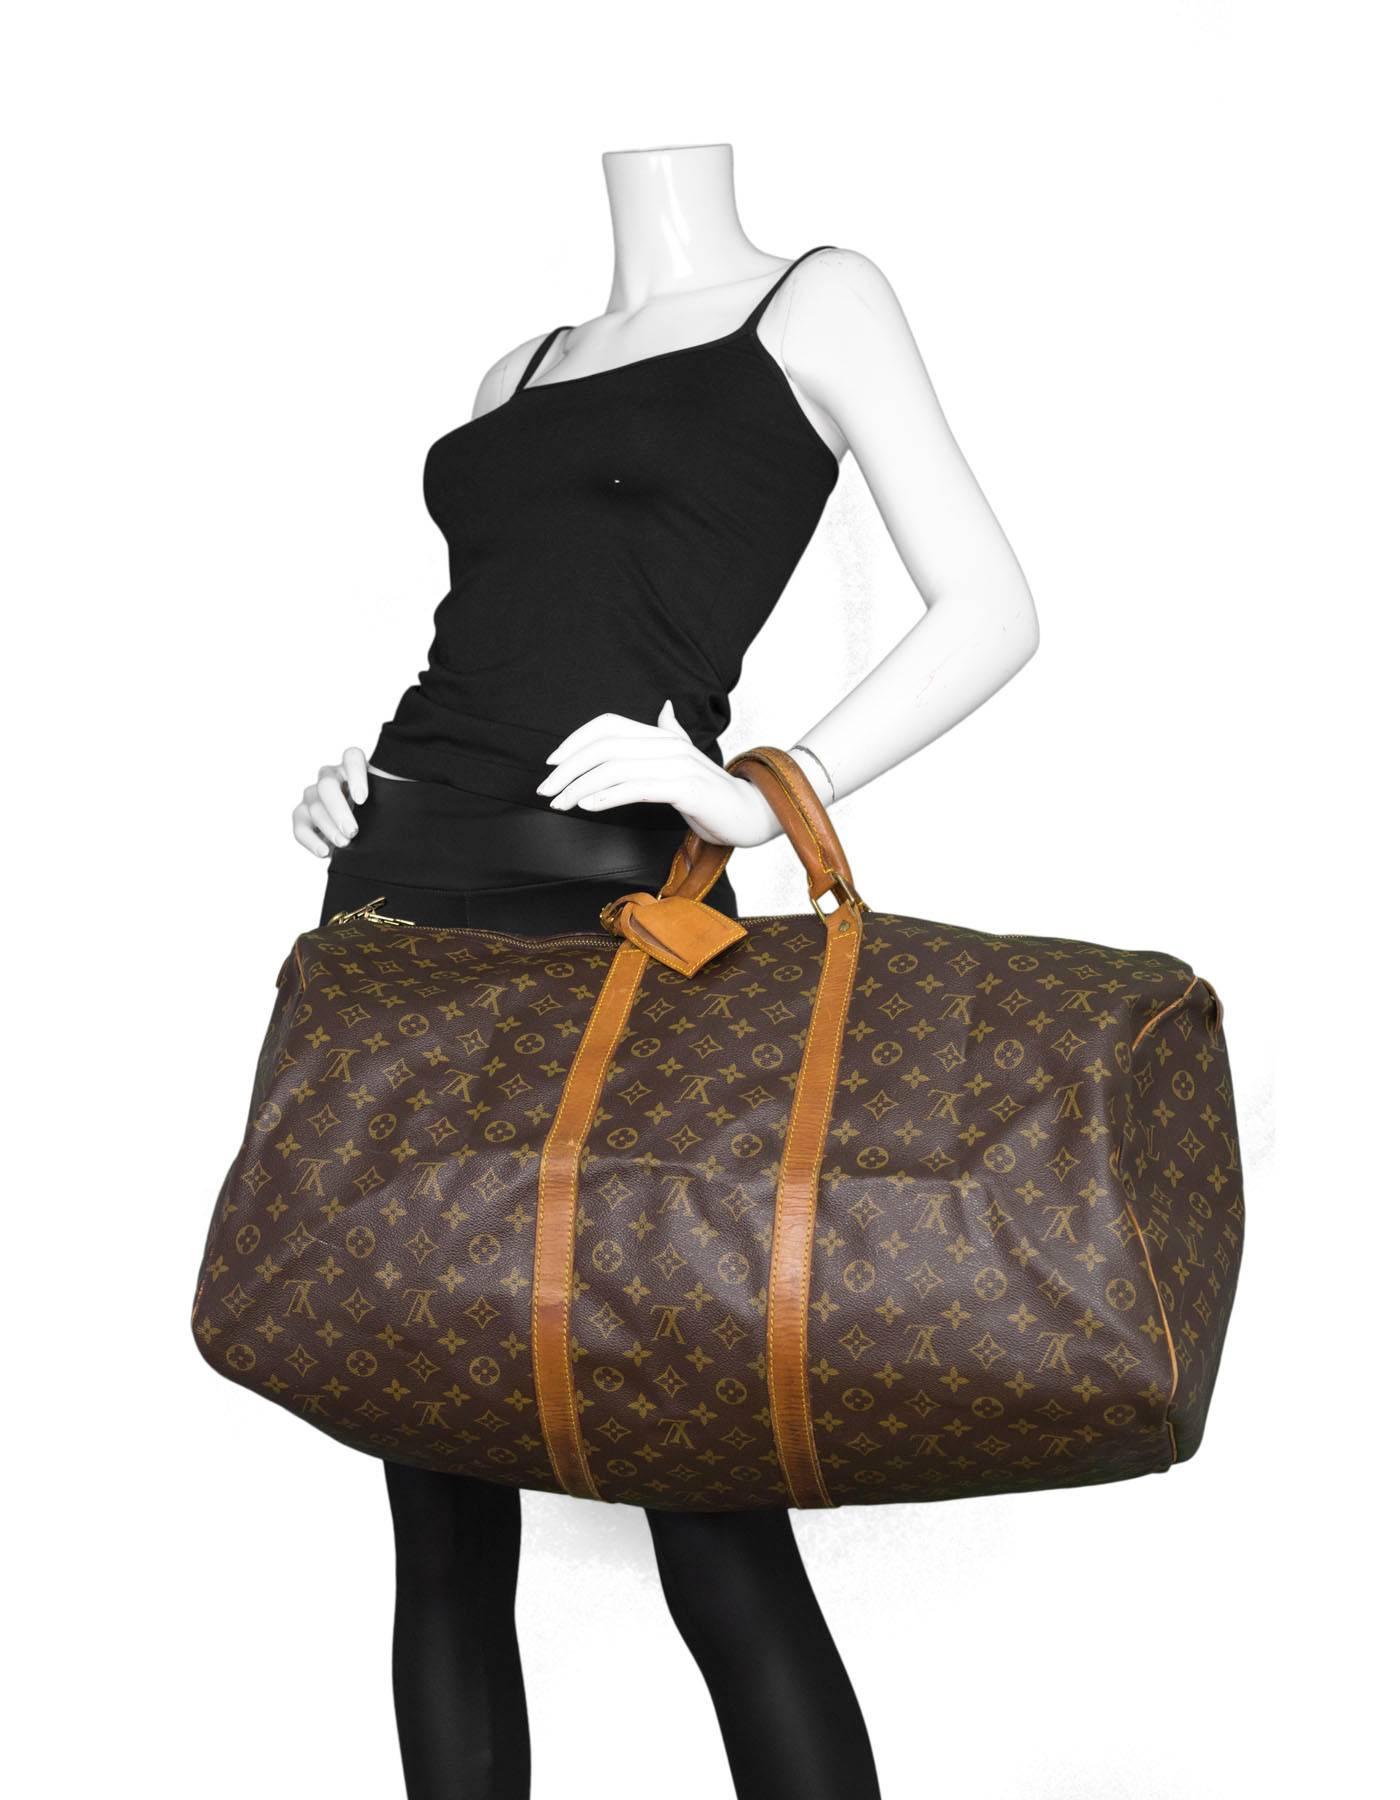 100% Authentic Louis Vuitton Vintage Monogram Keepall 60. Features all-over monogram print with aged tan leather handles and brass hardware. Brown textile interior. Includes lock and luggage tag. Excellent pre-owned condition with the exception of